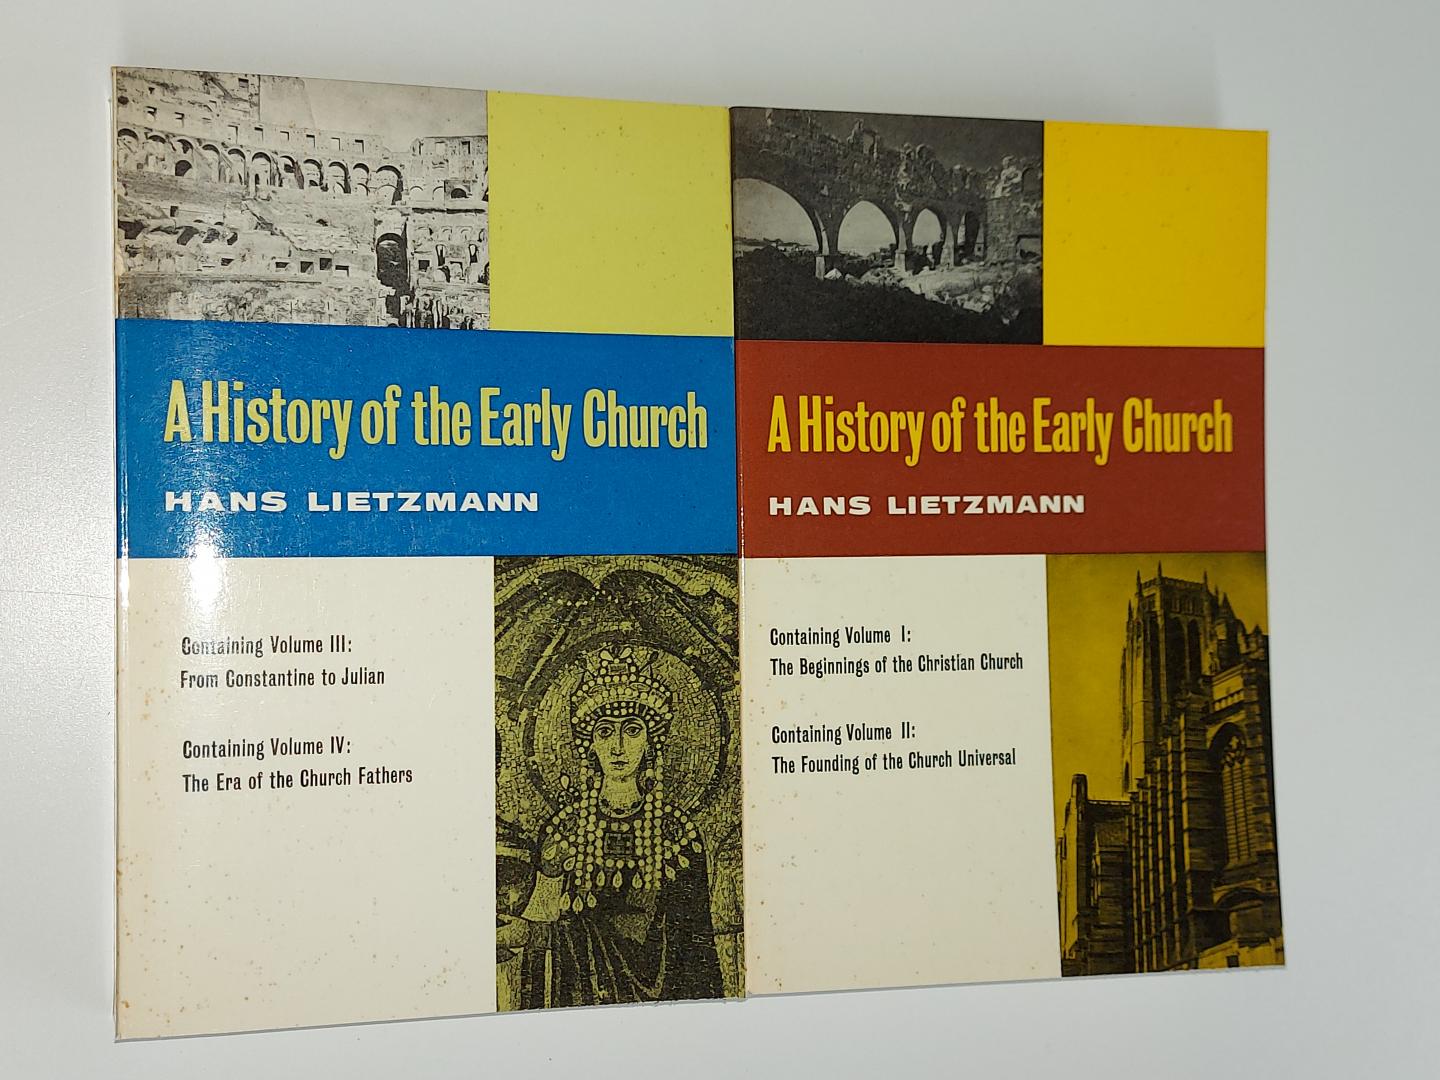 Lietzmann, Hans - A History of the Early Church. 4 volumes in 2 books